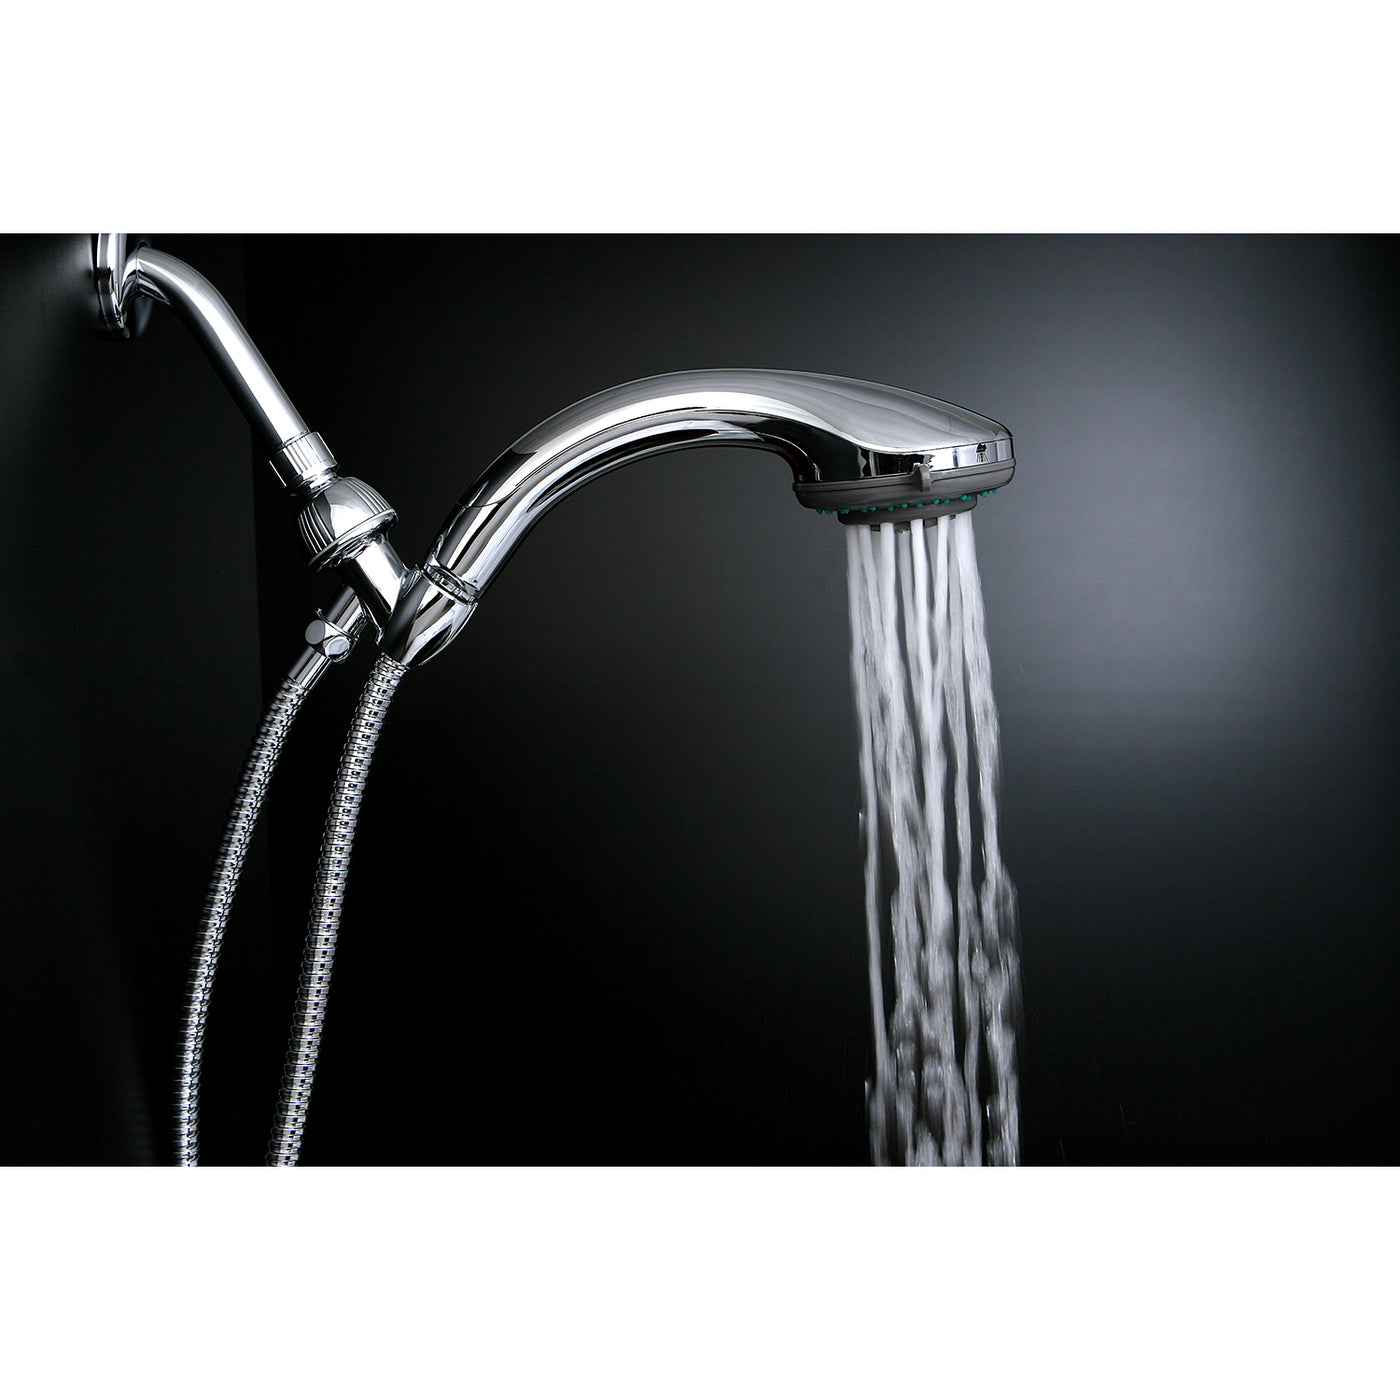 Elements of Design EX2522B 5-Function Hand Shower with Stainless Steel Hose, Polished Chrome